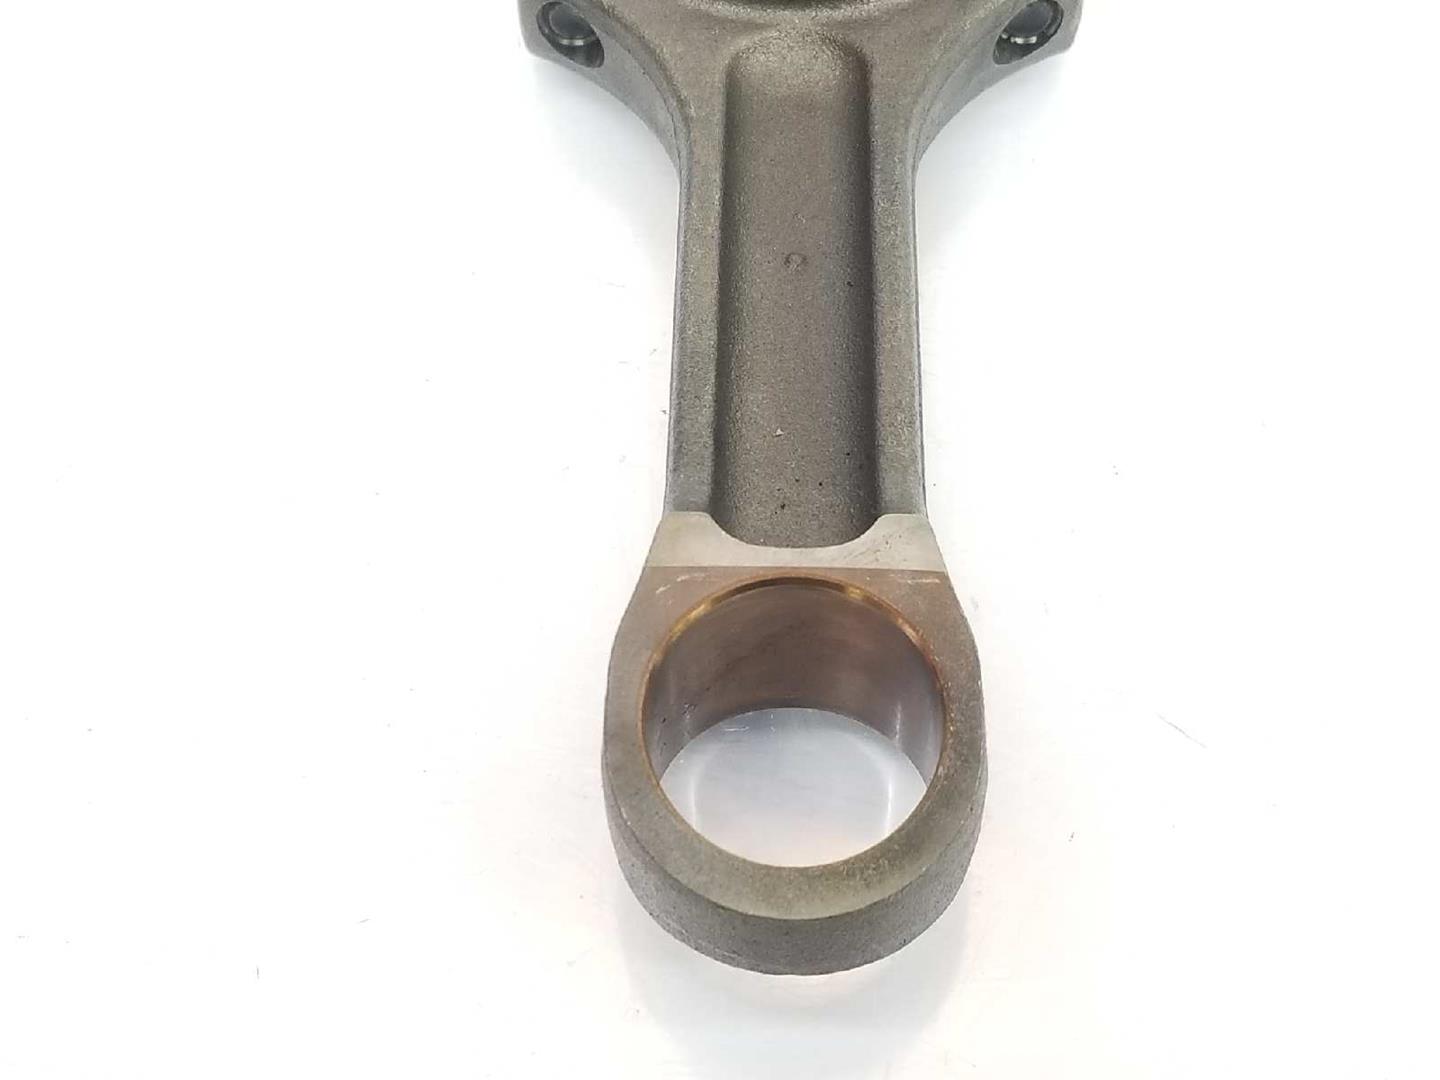 BMW X3 E83 (2003-2010) Connecting Rod 11247798368, 11247798368 19726866